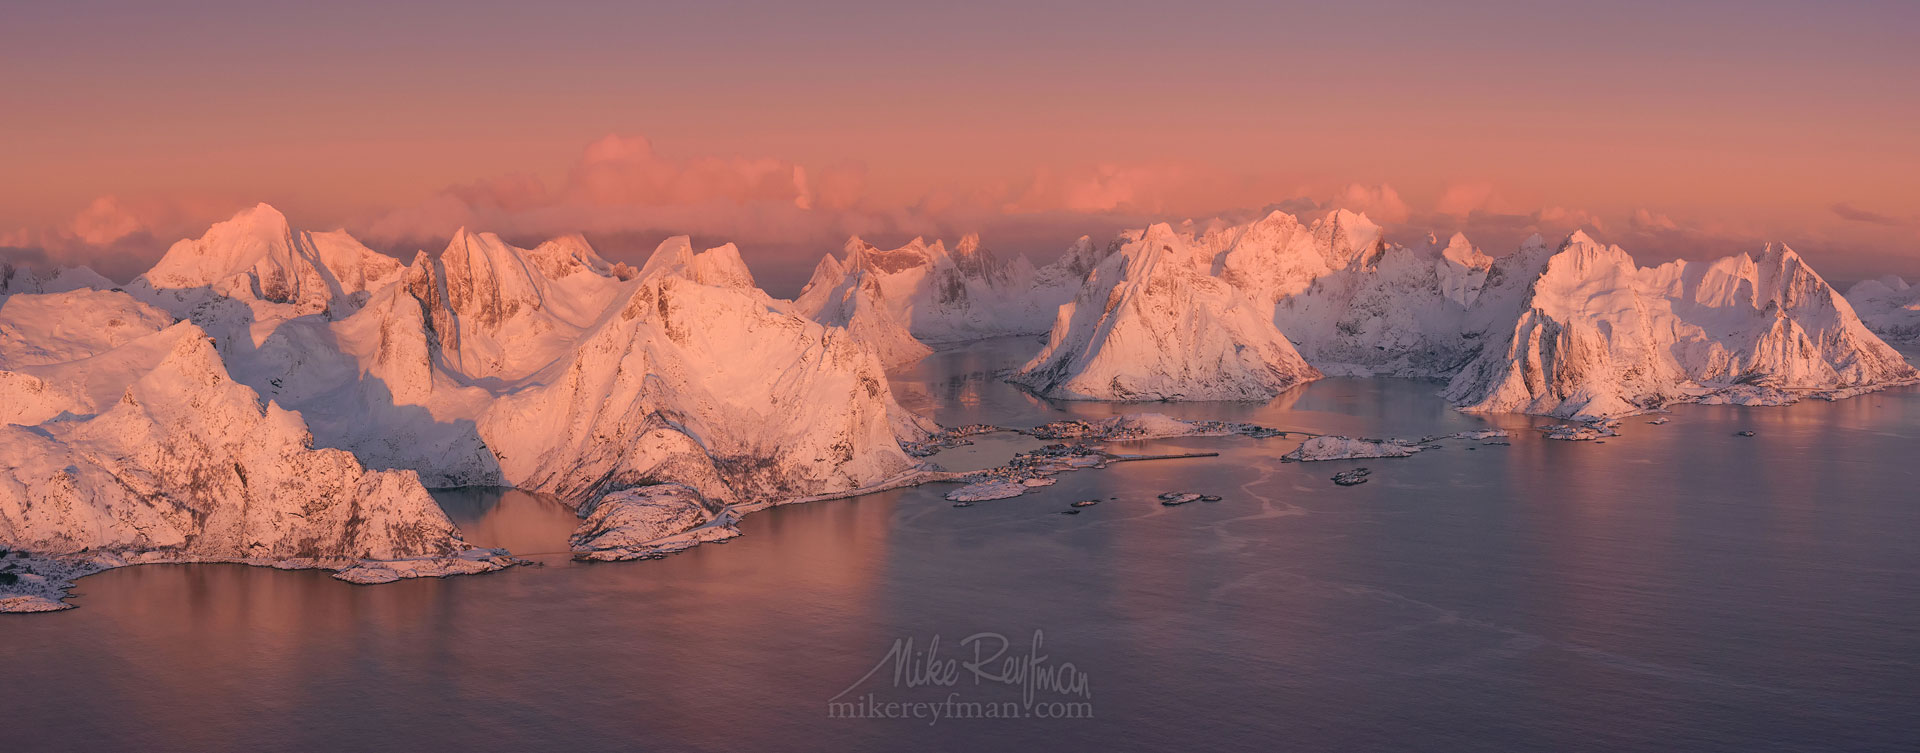 Aerial panoramic view of Lofoten archipelago and fishing village of Reine at sunrise. Moskenes, Lofoten archipelago, Norway. LF-MRD1E1373-5-6_Pano-2.55x1 - Lofoten Archipelago in Winter, Arctic Norway - Mike Reyfman Photography